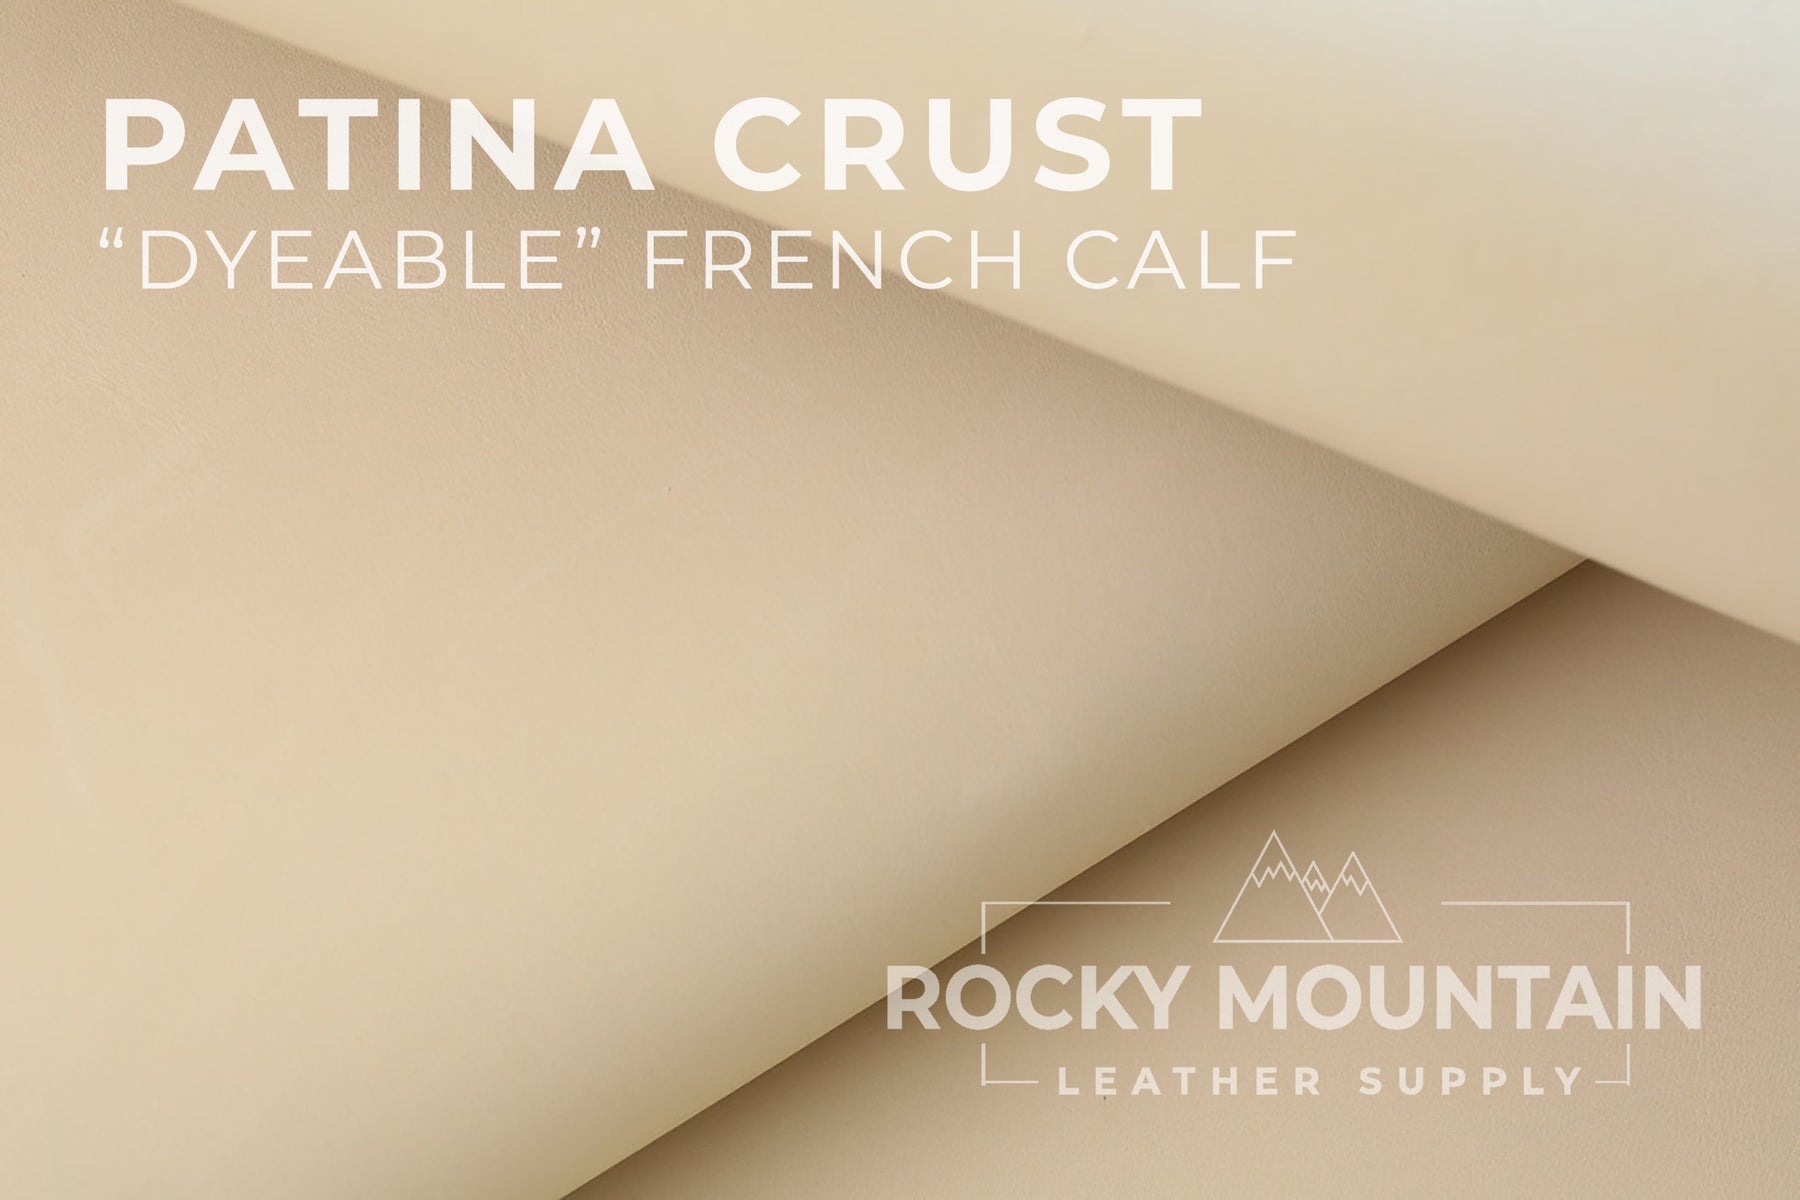 Tannery Du Puy 🇫🇷 - Patina Crust -  "Dyeable" French Calf Crust for Patina Effect  (SAMPLES